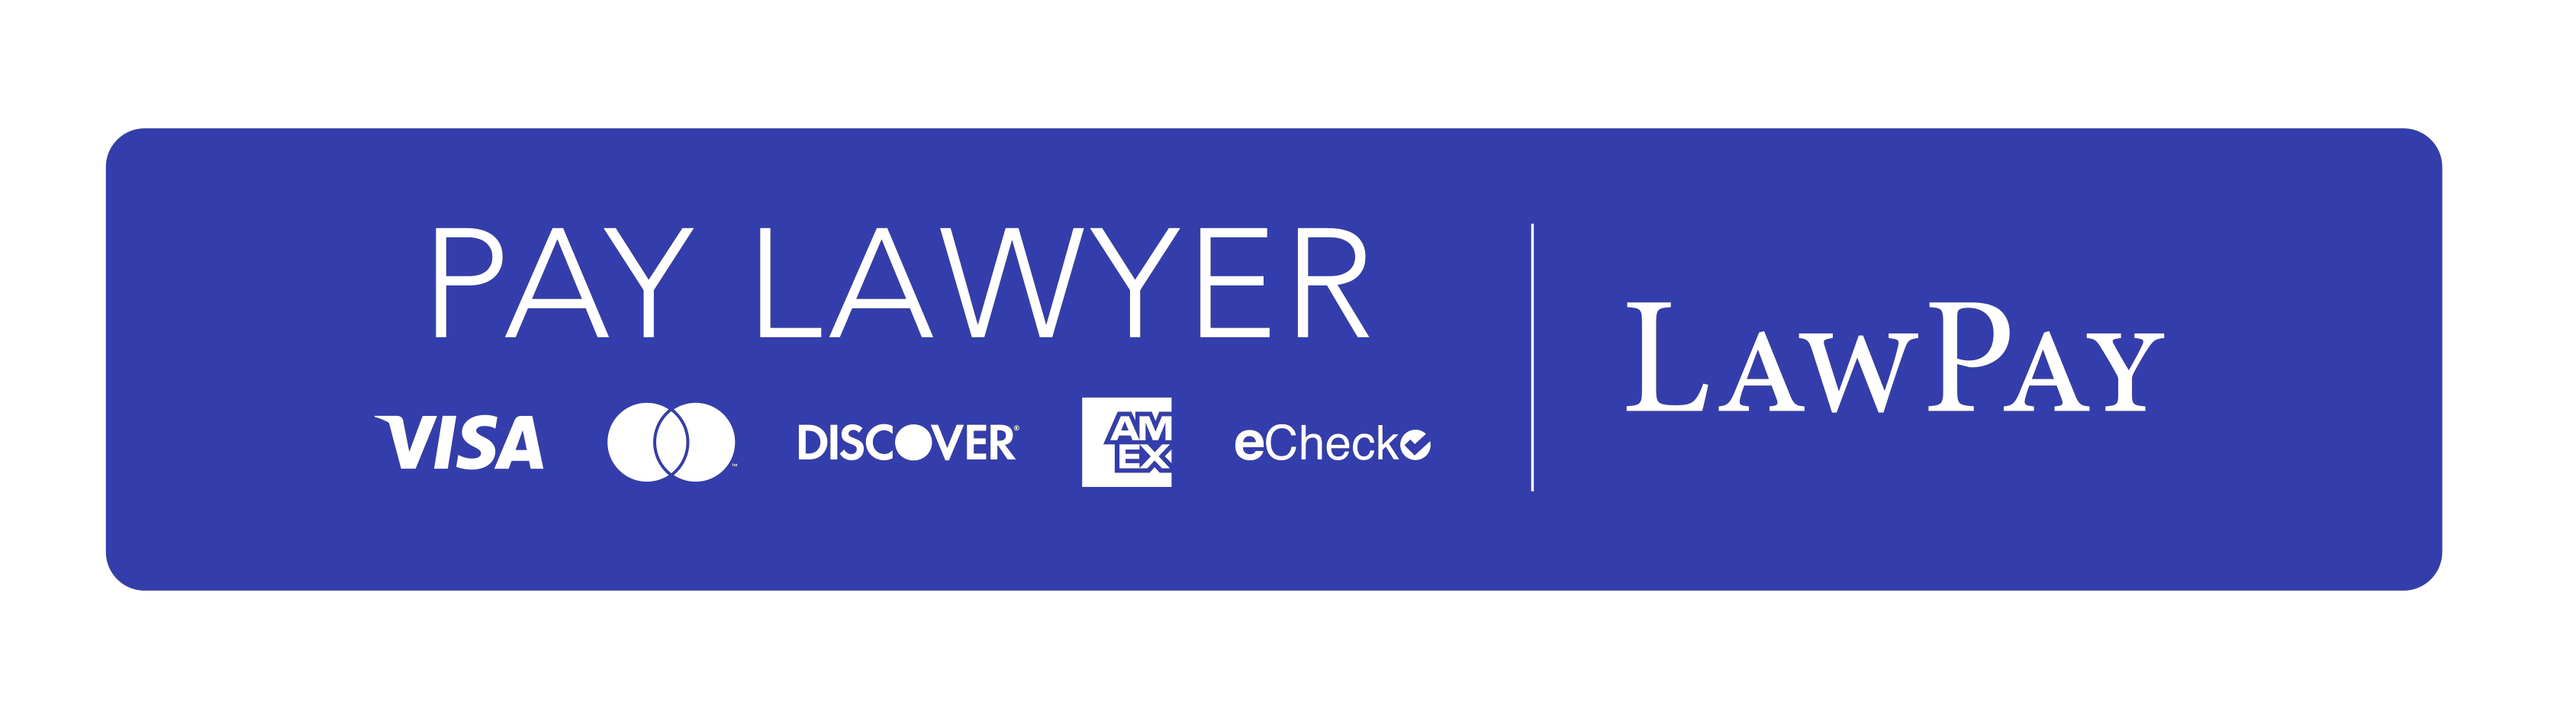 Pay Lawyer | Visa | Discover | Am Ex | eCheck | Law Pay